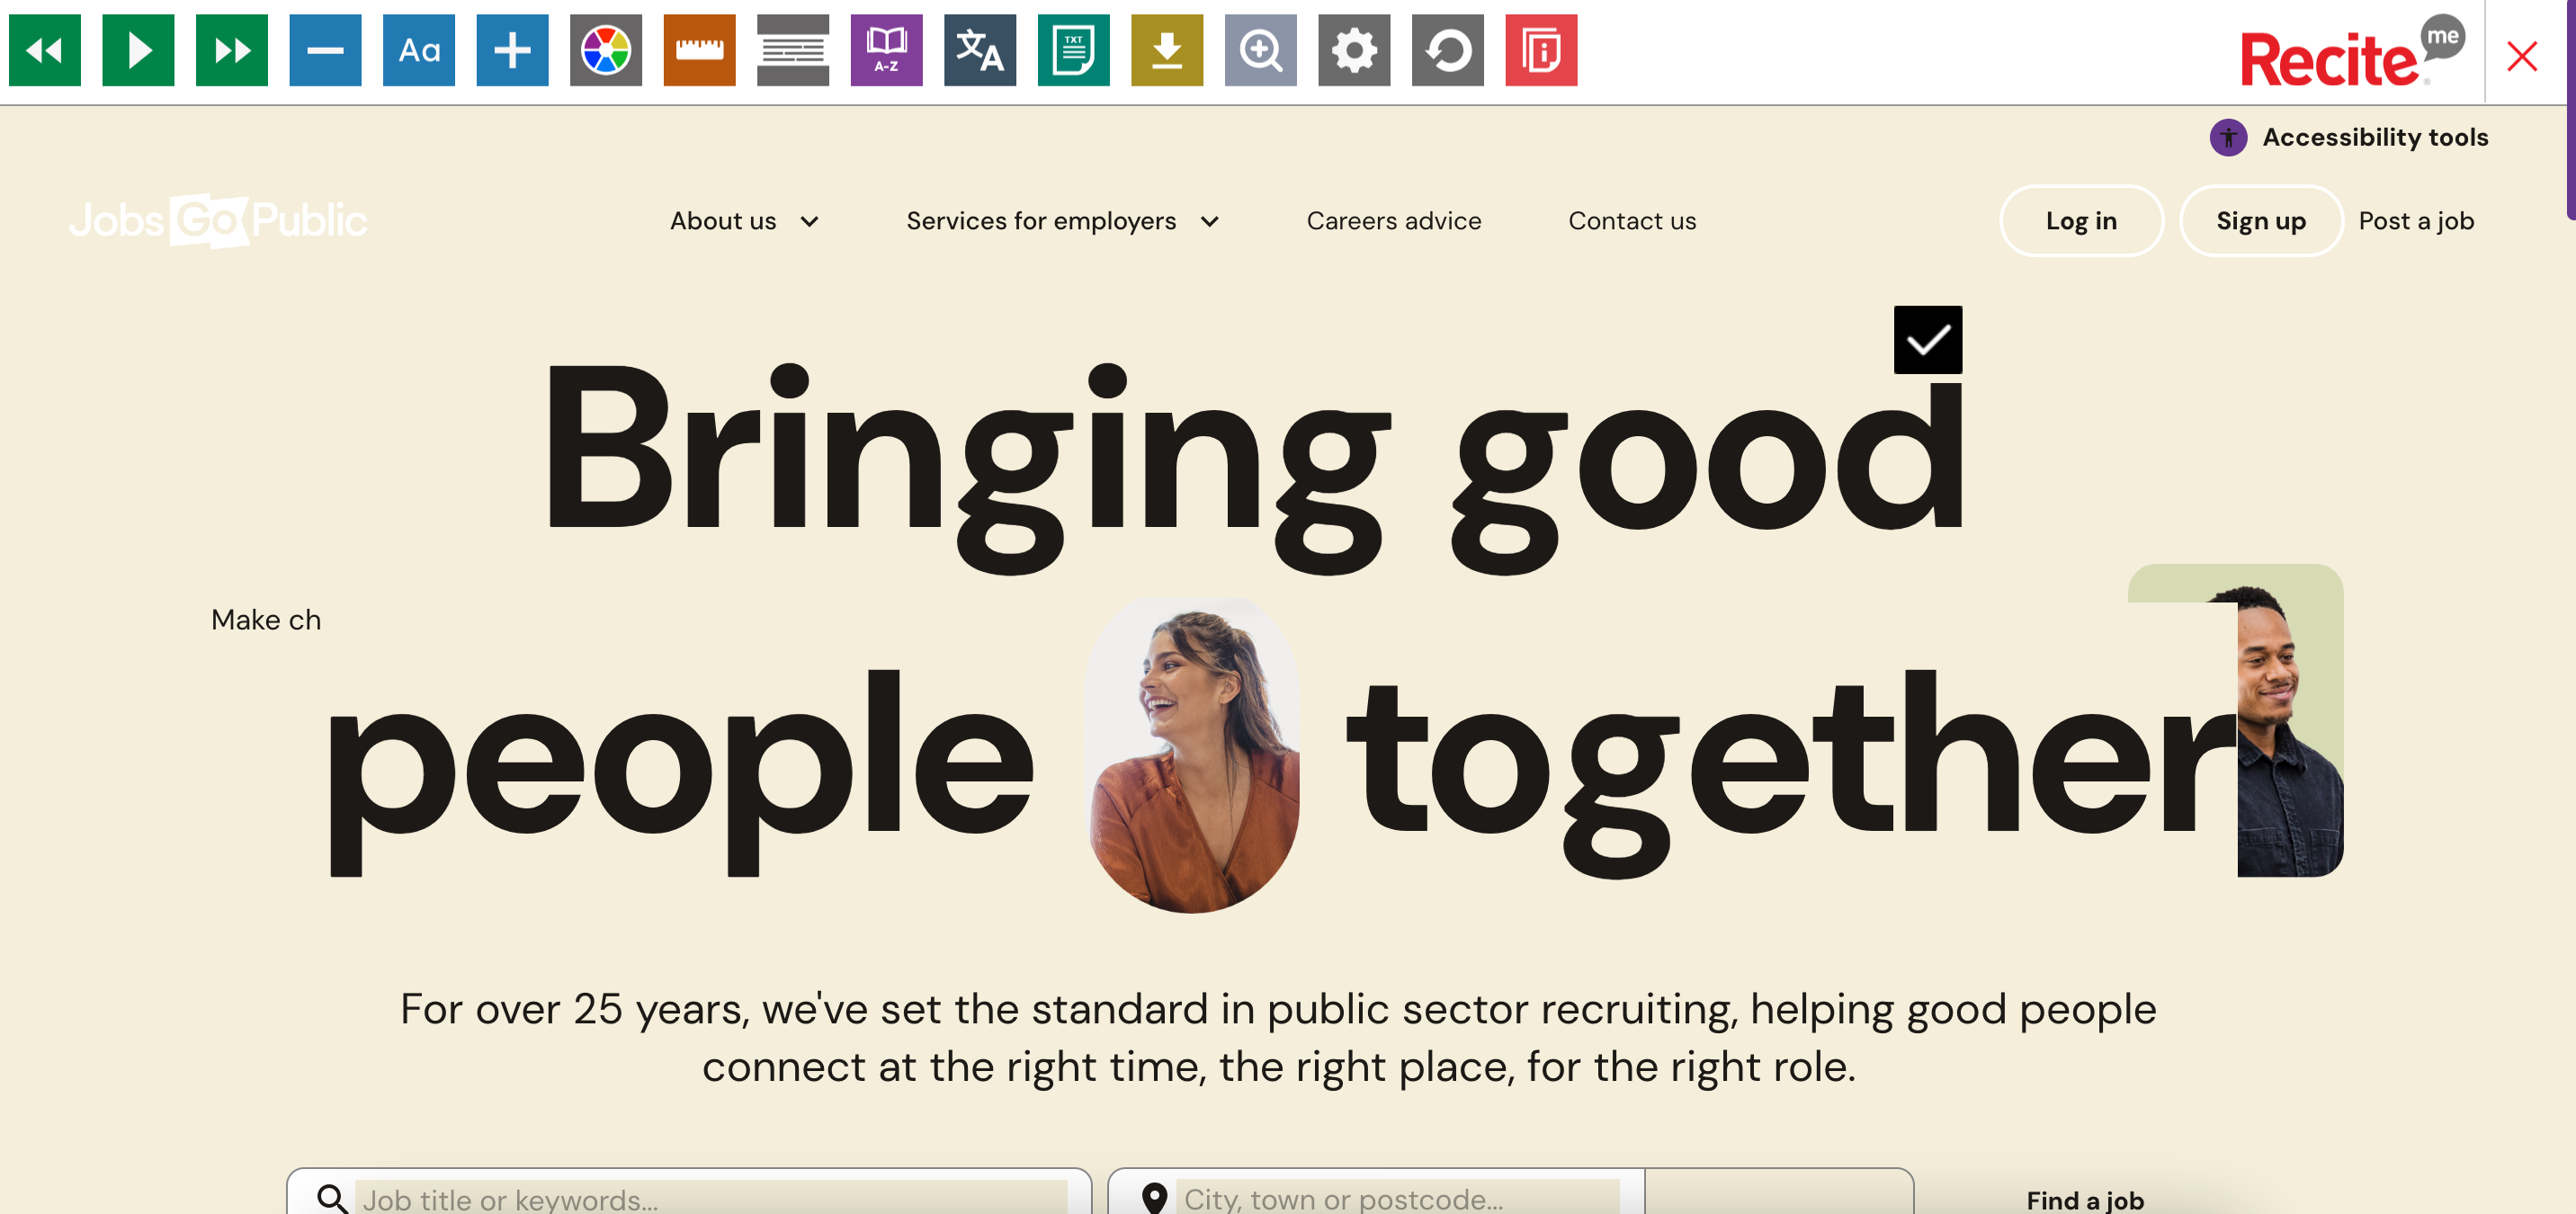 A screen grab of Jobs Go Public homepage with beige background and black text